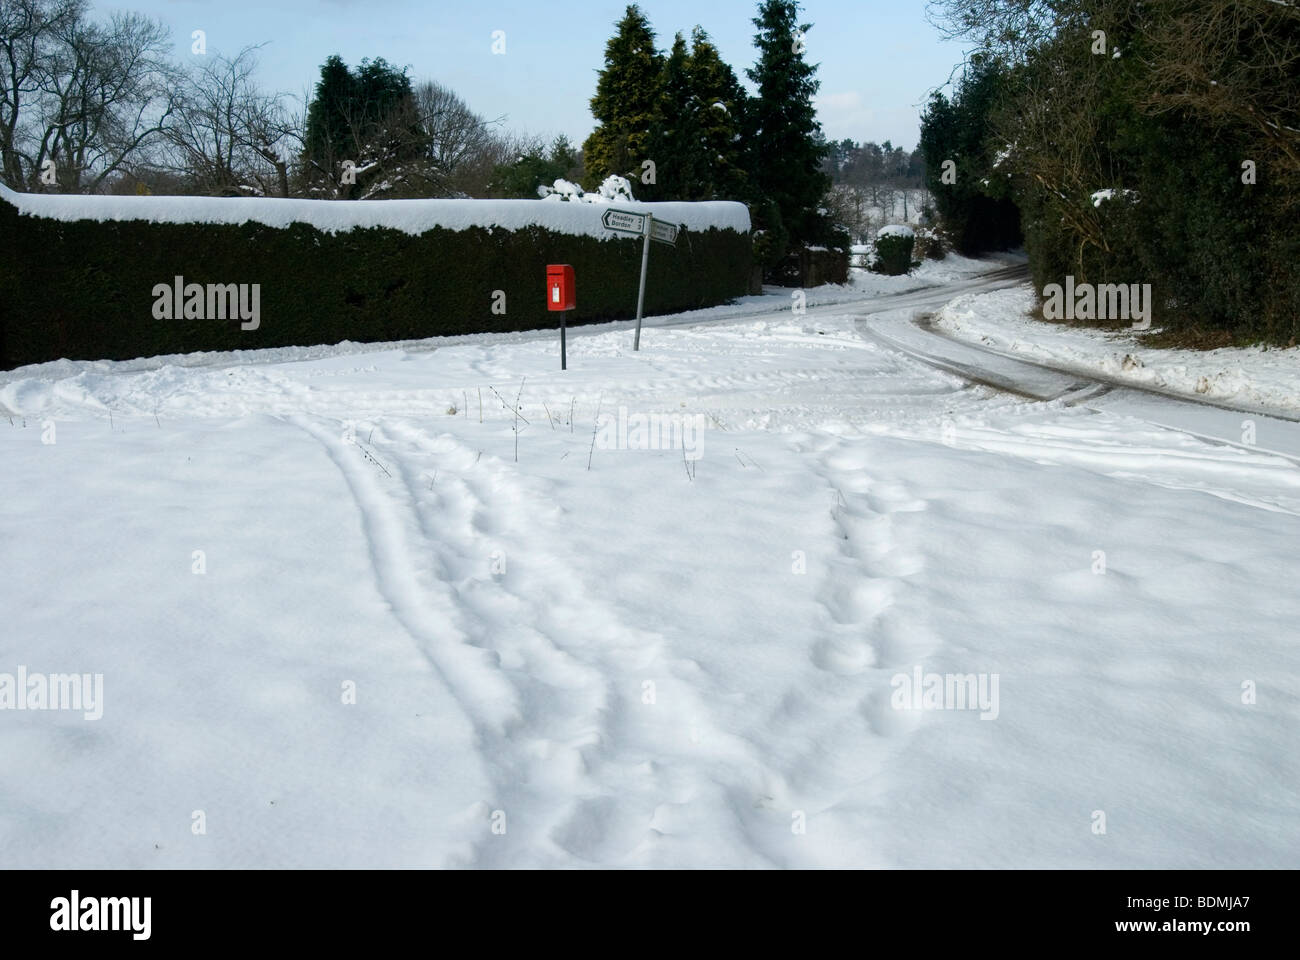 Christmas card snowy landscape scene with footprints and a red letter box and road sign Stock Photo